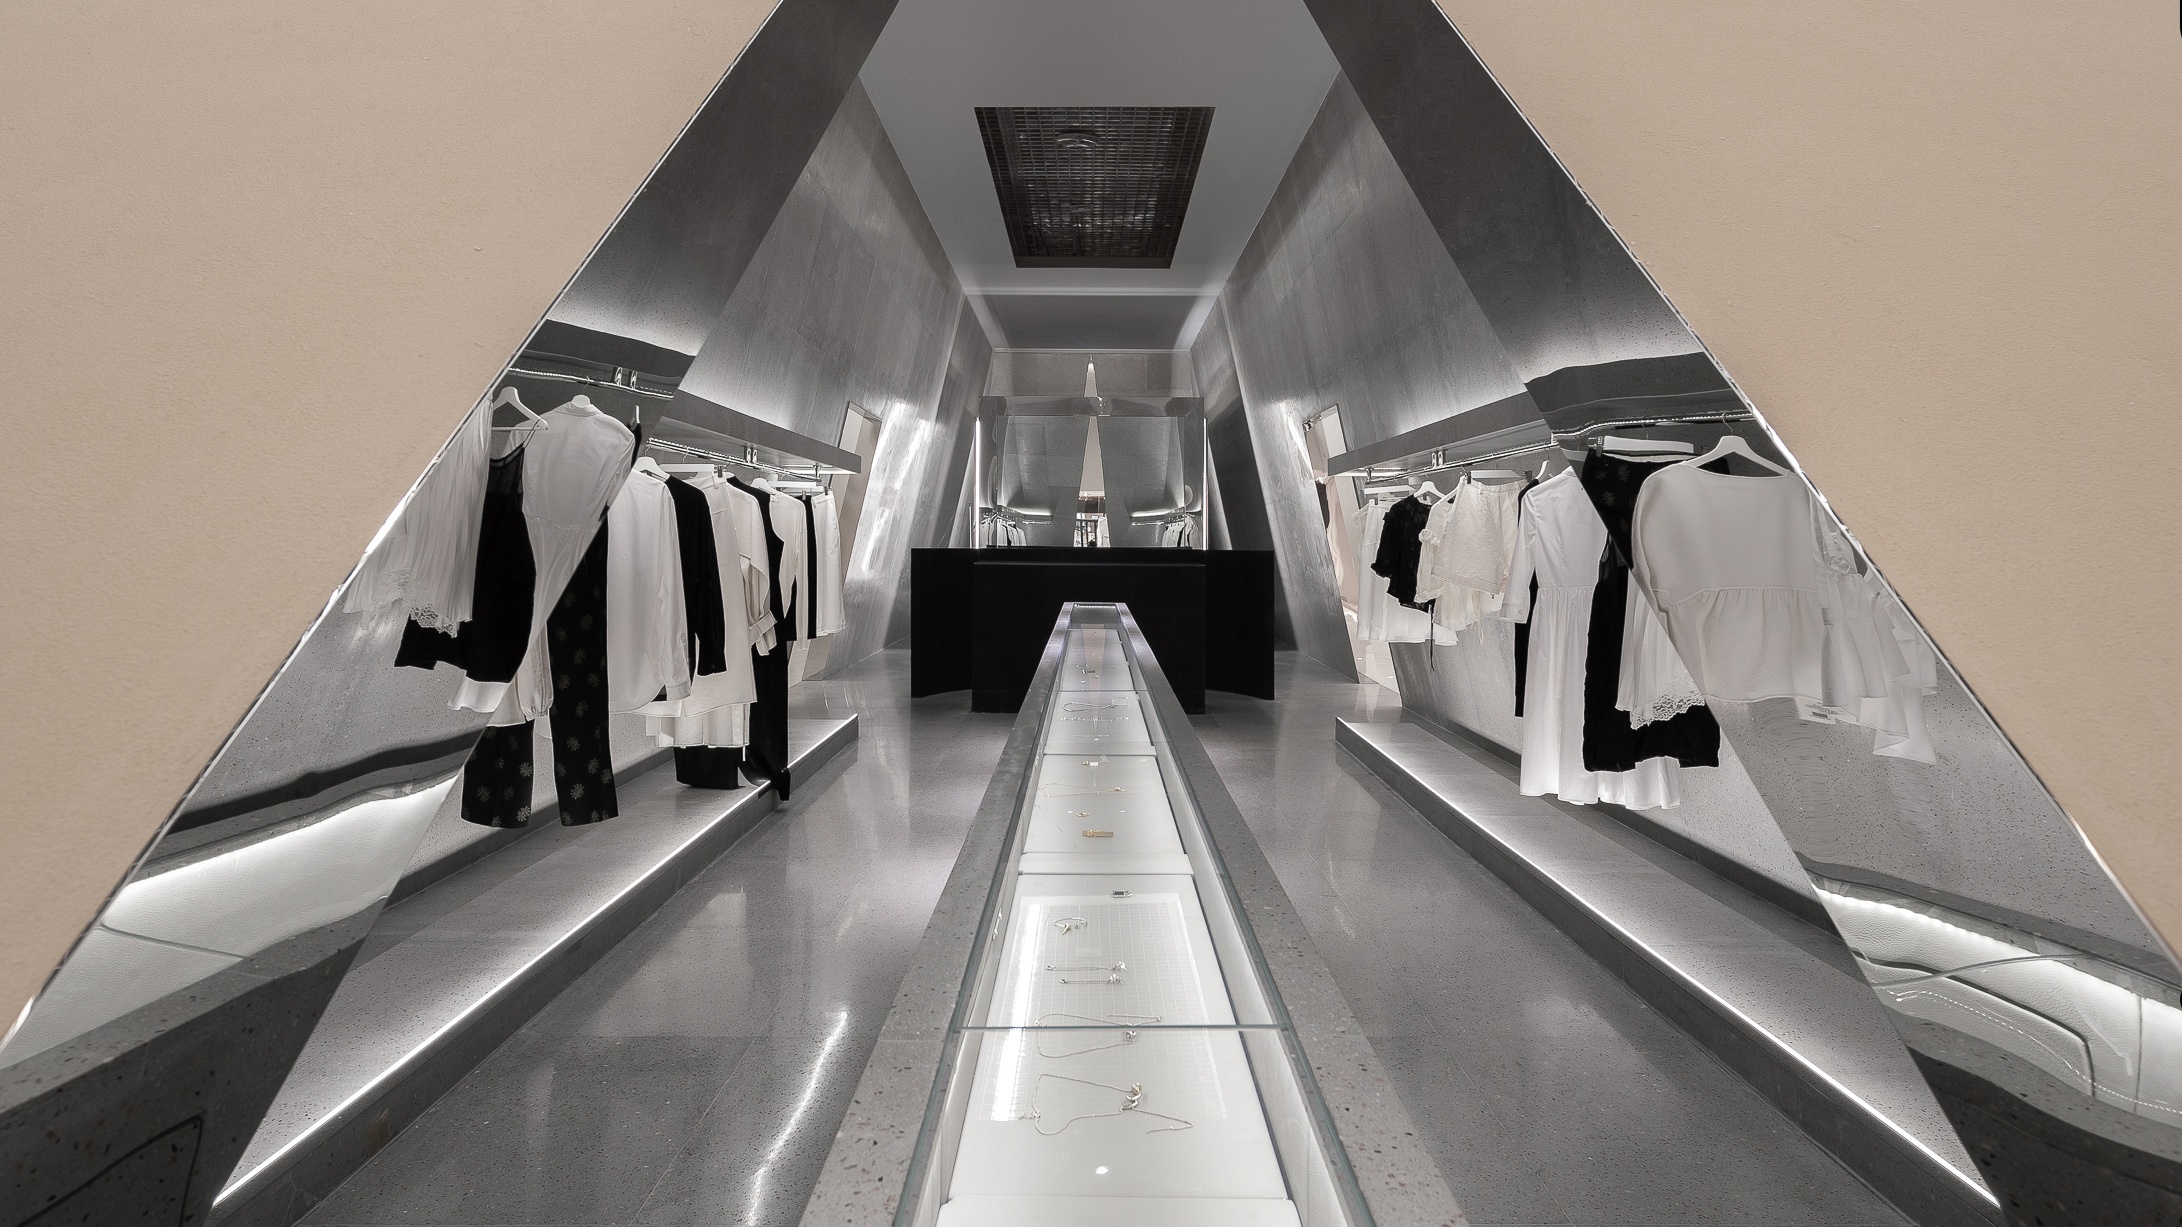 After the COVID-19 pandemic, the luxury landscape in China quickly became more advanced, and local independent multi-brand stores have taken advantage. Photo: SND boutique. Credit: Various Associates